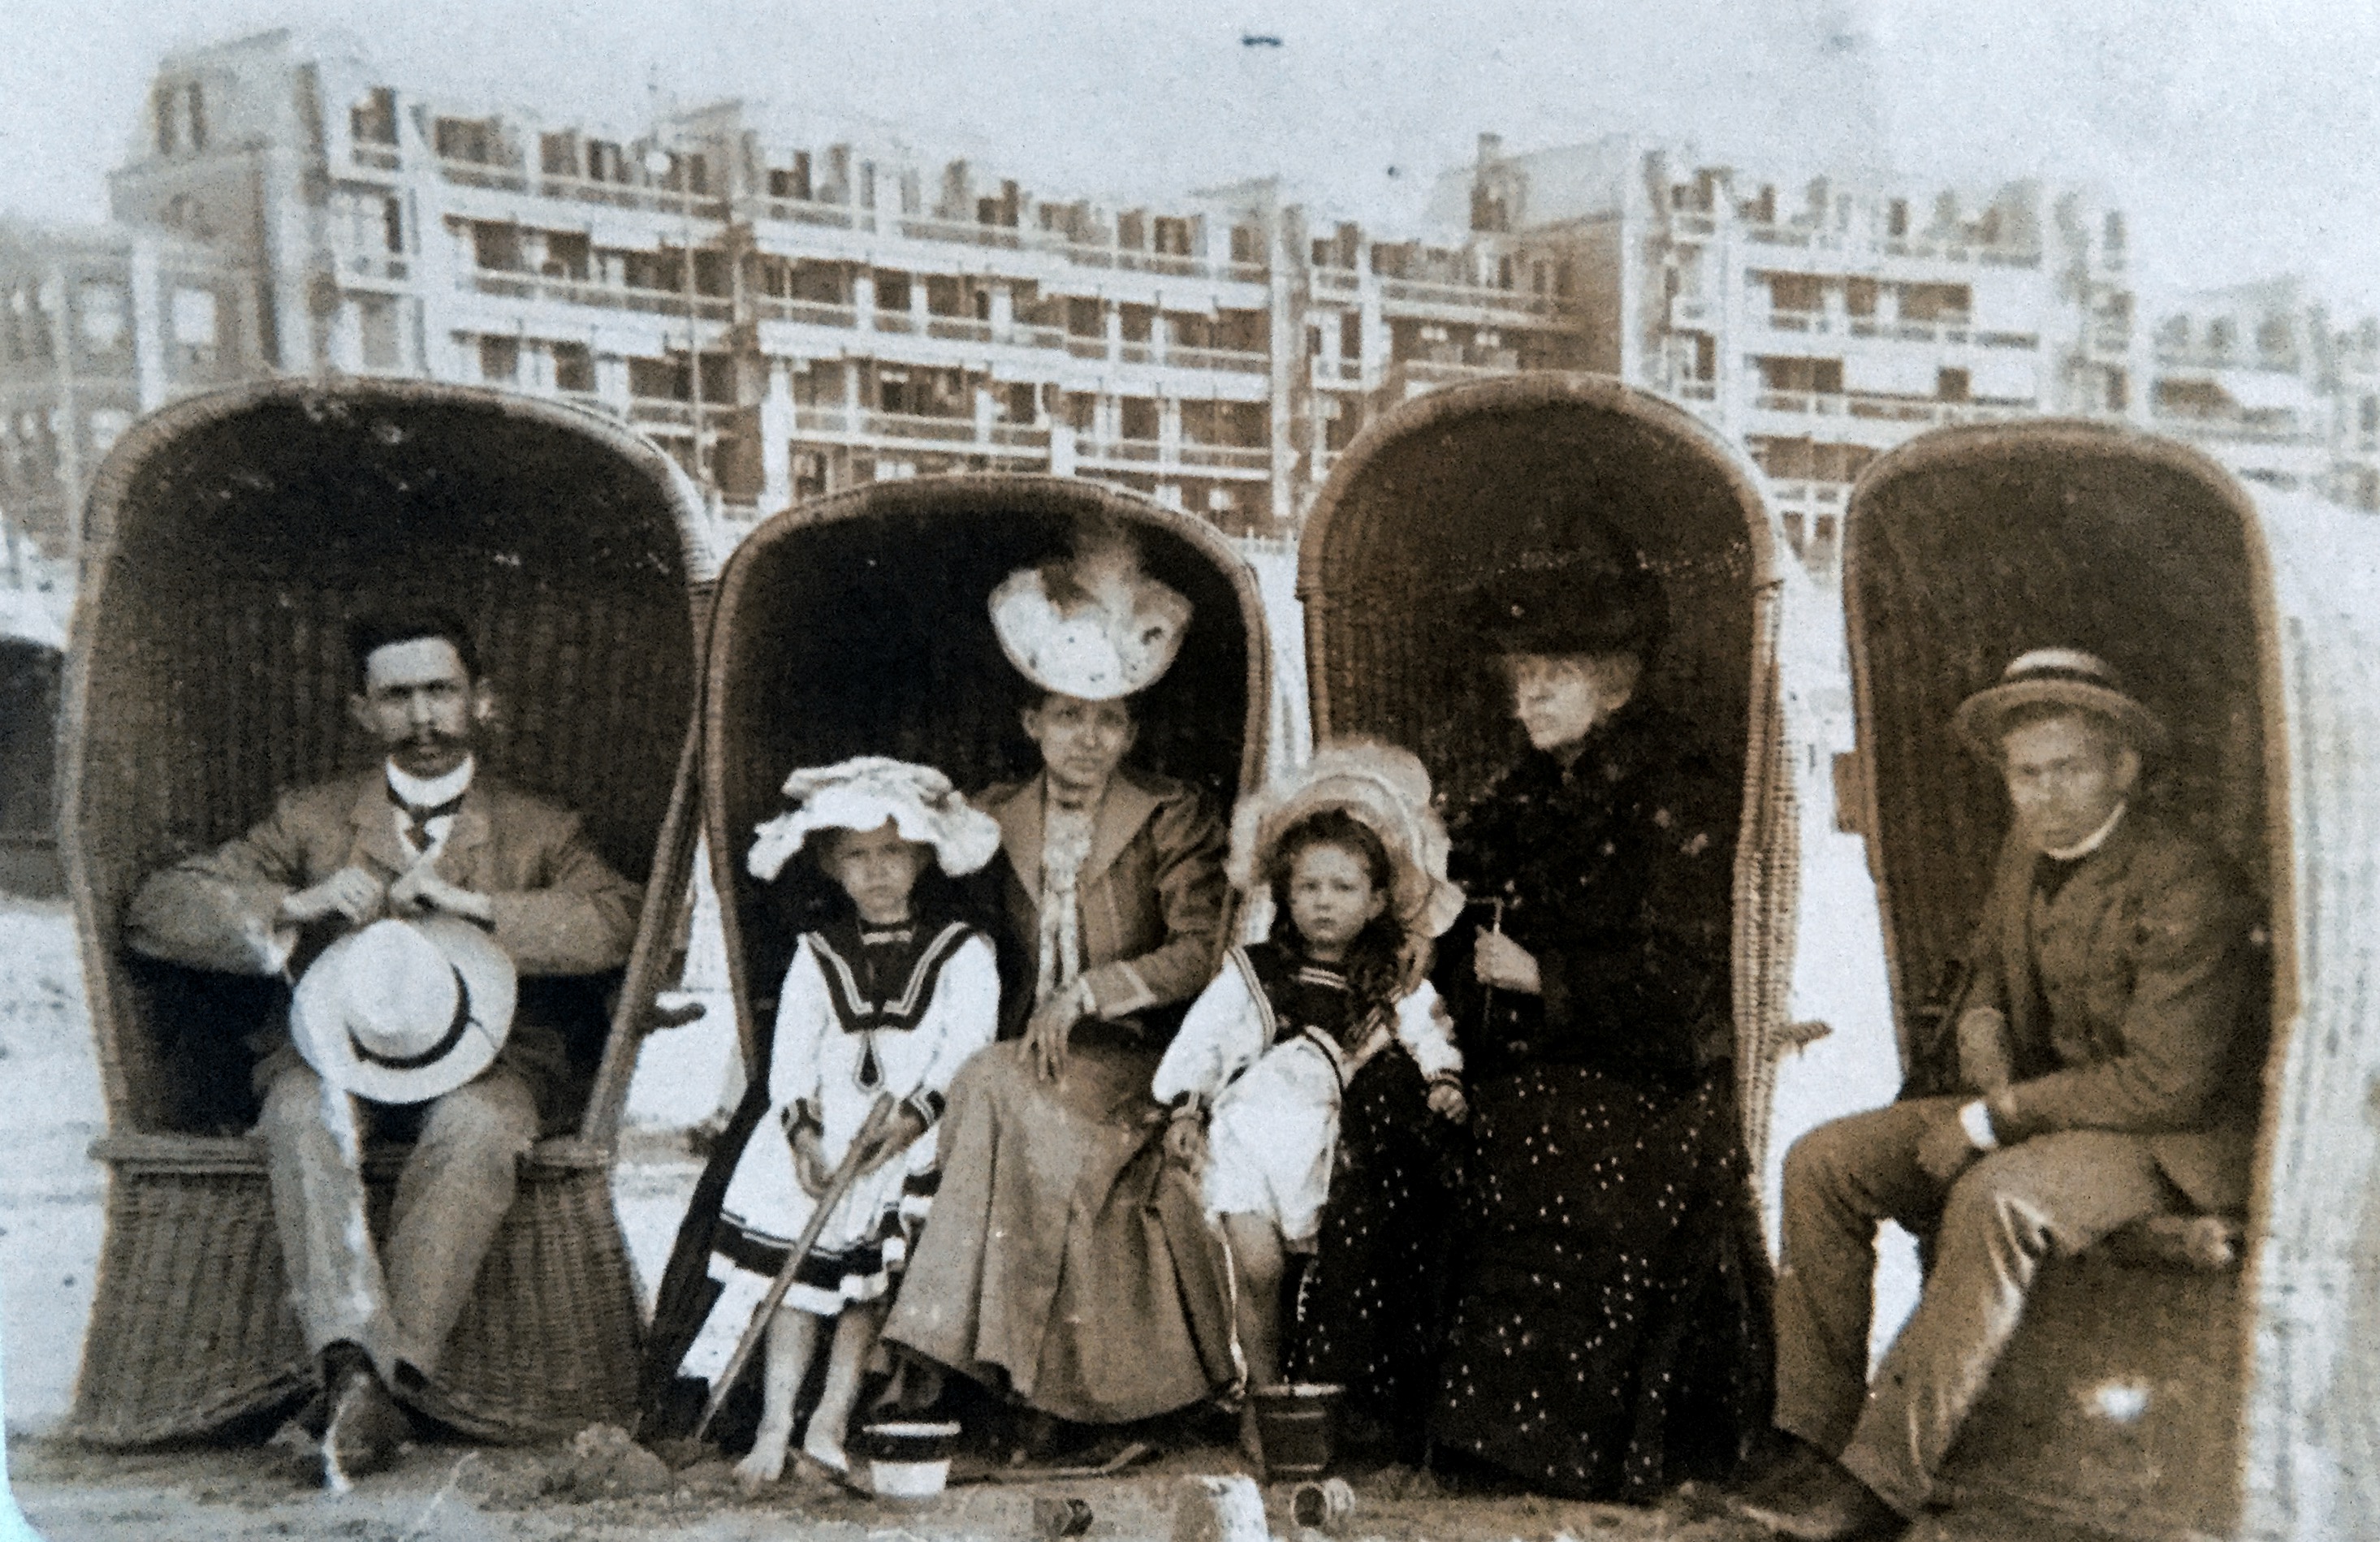 In the Dutch East Indies long service leave (up to 2 years!) in the ‘Mother country’ was a standard entitlement for public servants. This photo depicts my grand parents, my mother (the child on the right hand side), her elder sister + some unidentifiable relatives relaxing on the beach in front of the Grand Hotel (Scheveningen) in the summer of 1906.